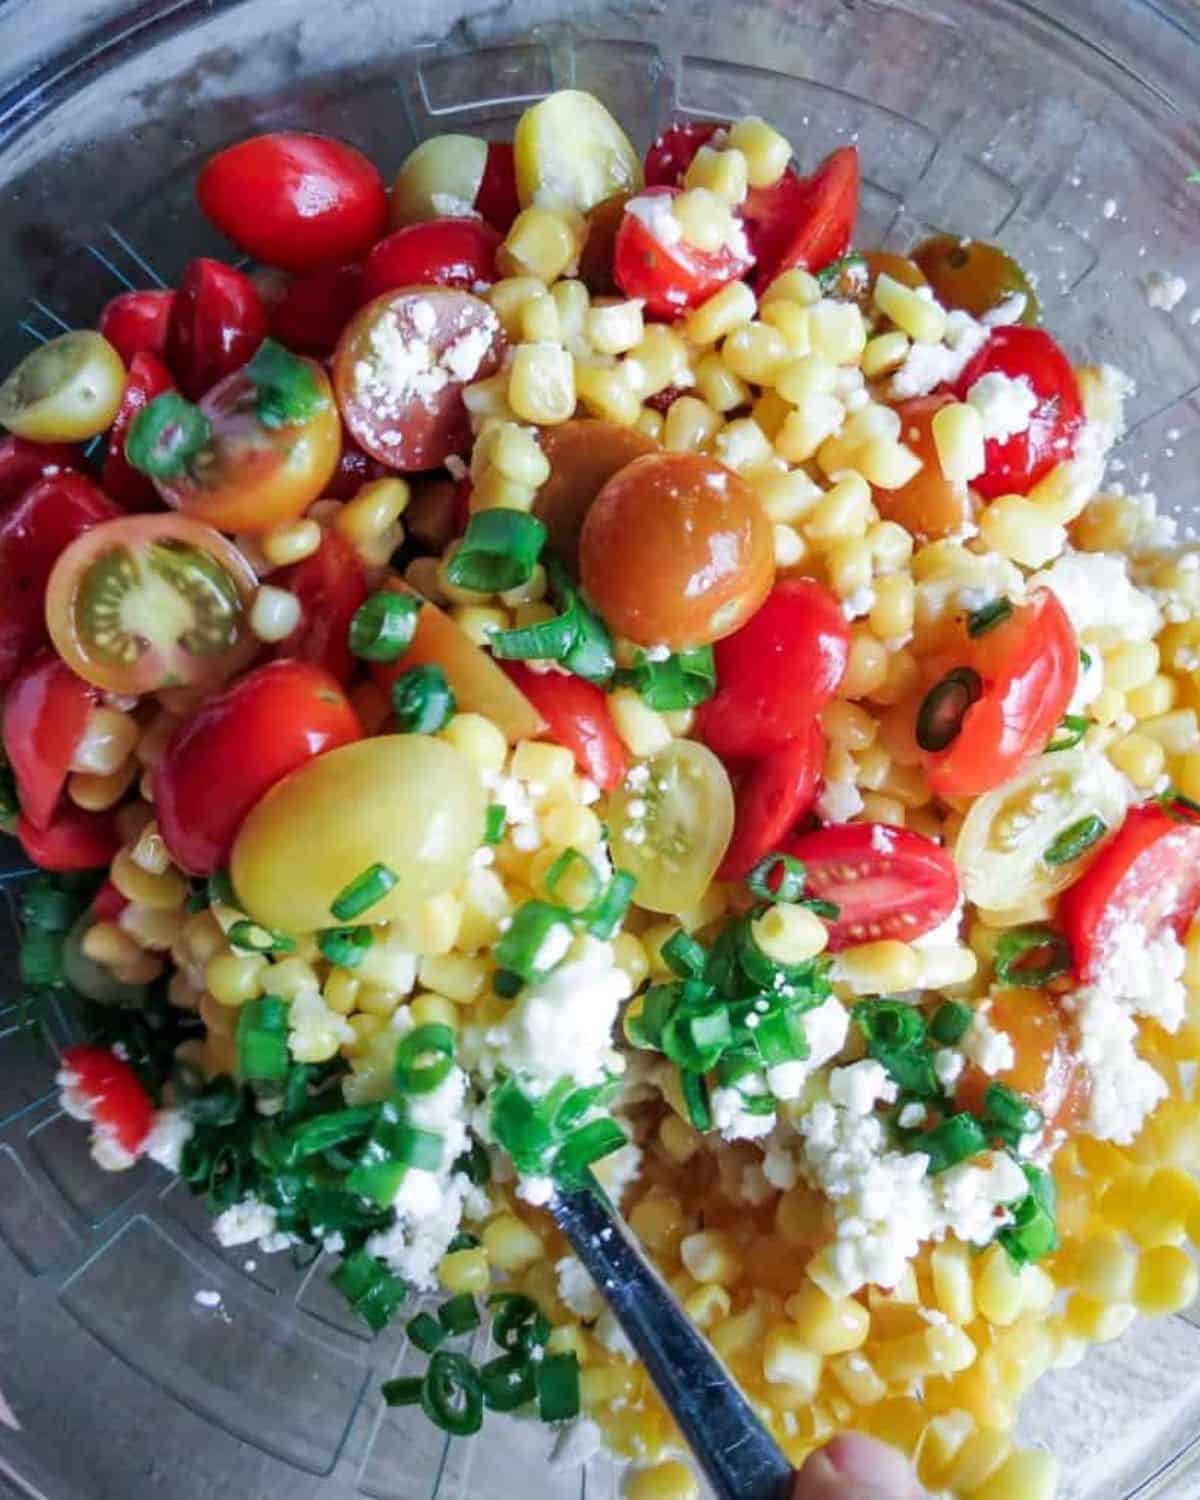 Glass bowl full of Corn Salad With Tomatoes stirred with a silver spoon.